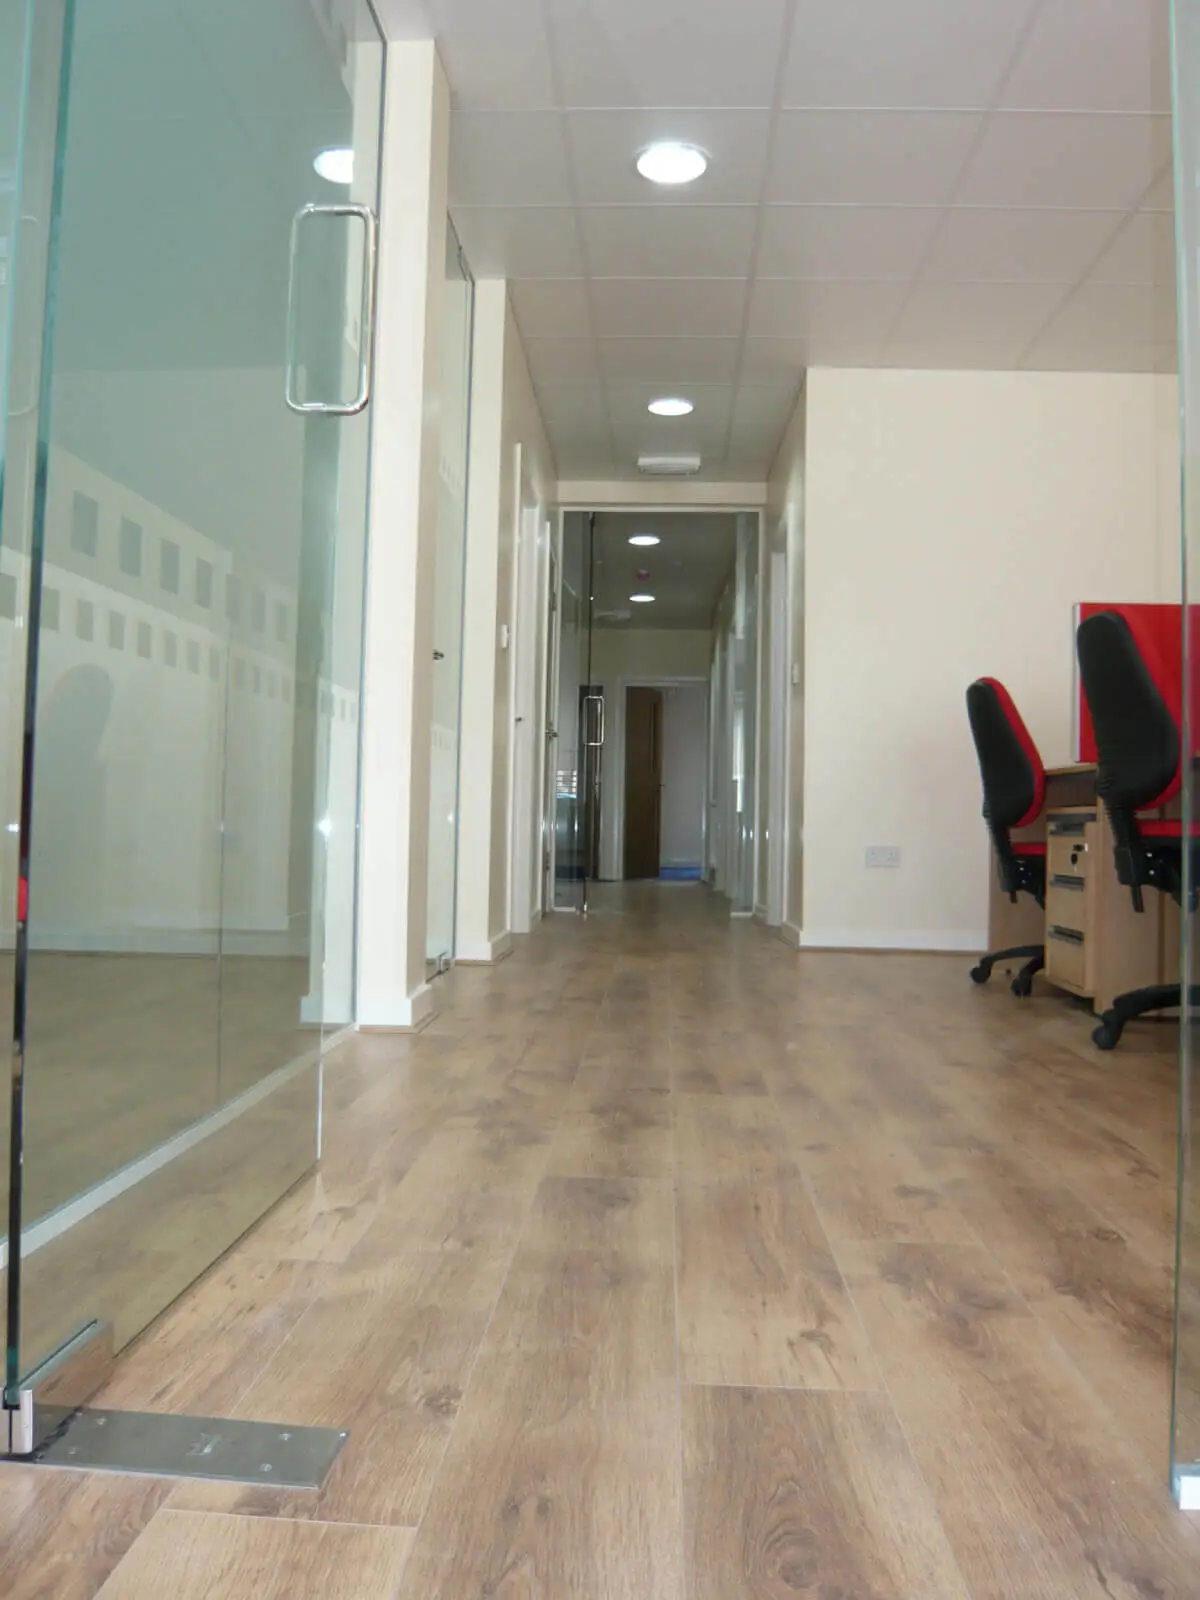 Office space with Laminated Wood Floor 8